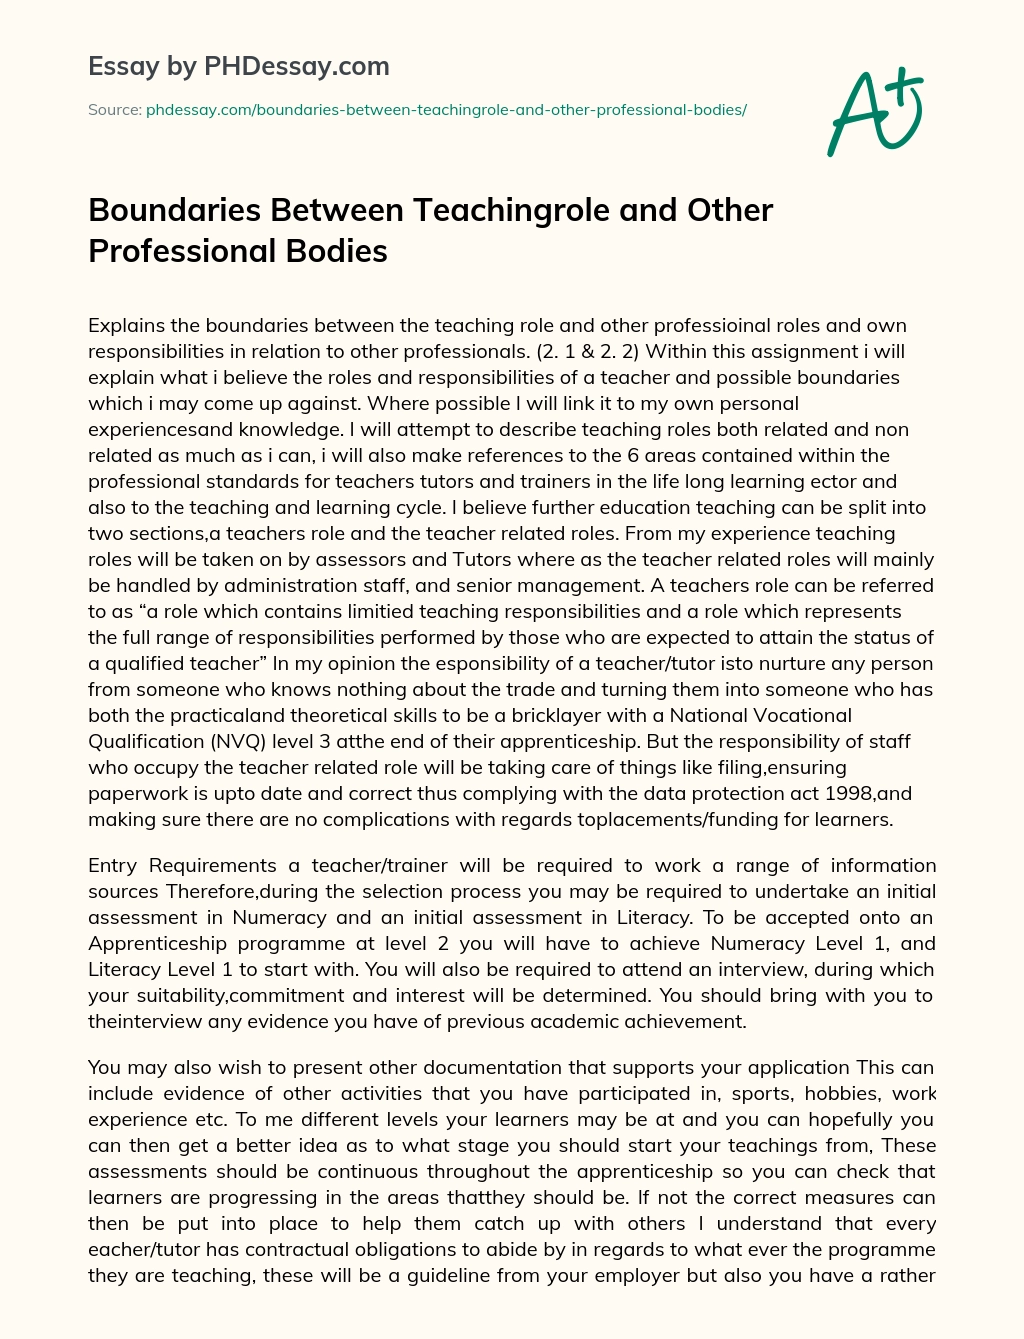 Boundaries Between Teachingrole and Other Professional Bodies essay